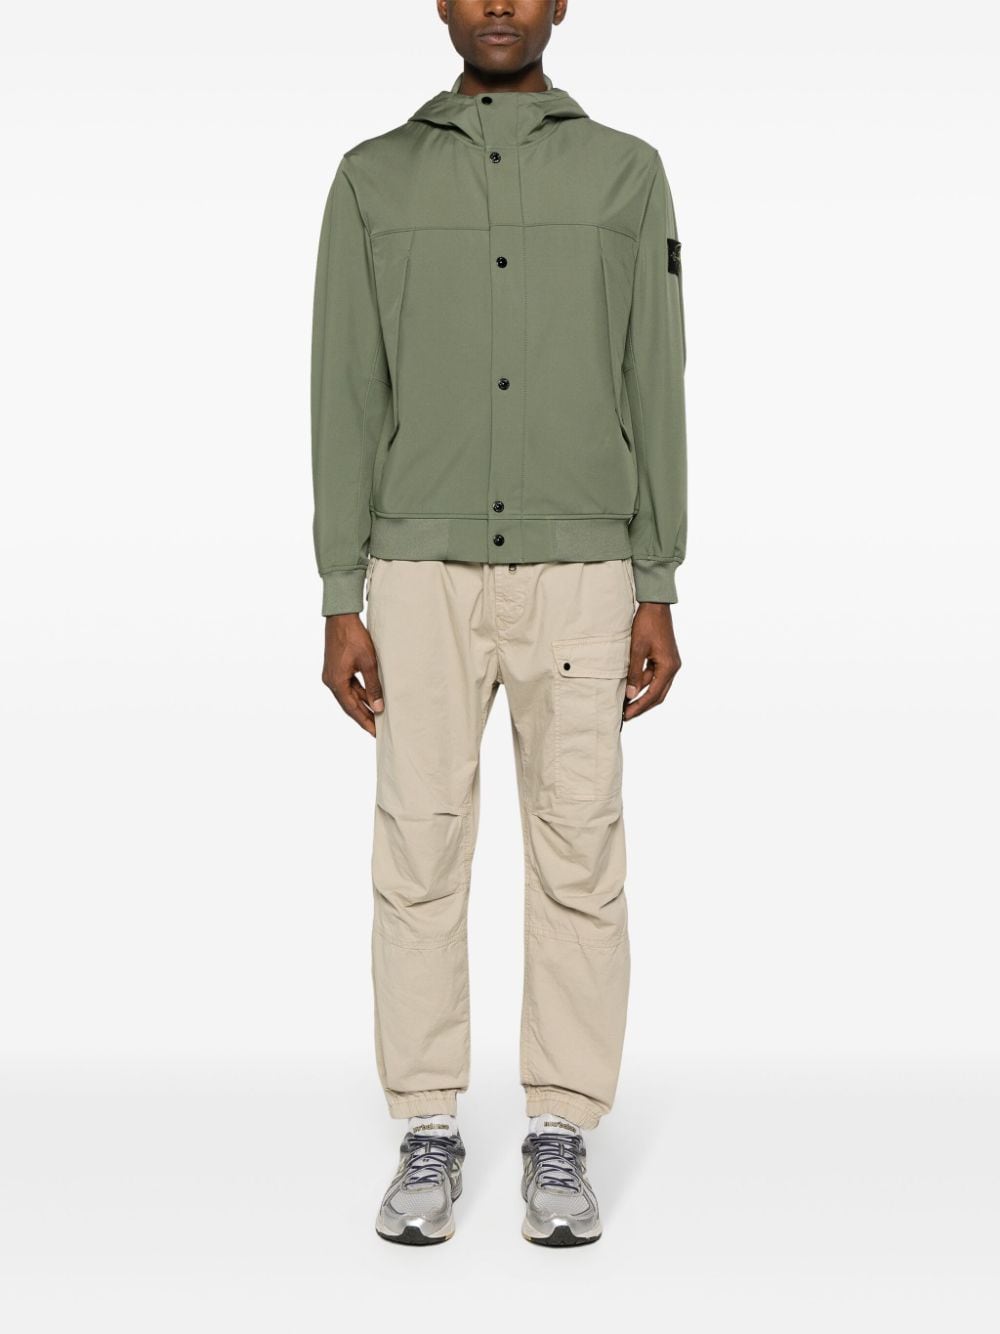 Stone Island - Veste 40227 LIGHT SOFT SHELL-R_E.DYE® TECHNOLOGY IN RECYCLED POLYESTER - Lothaire